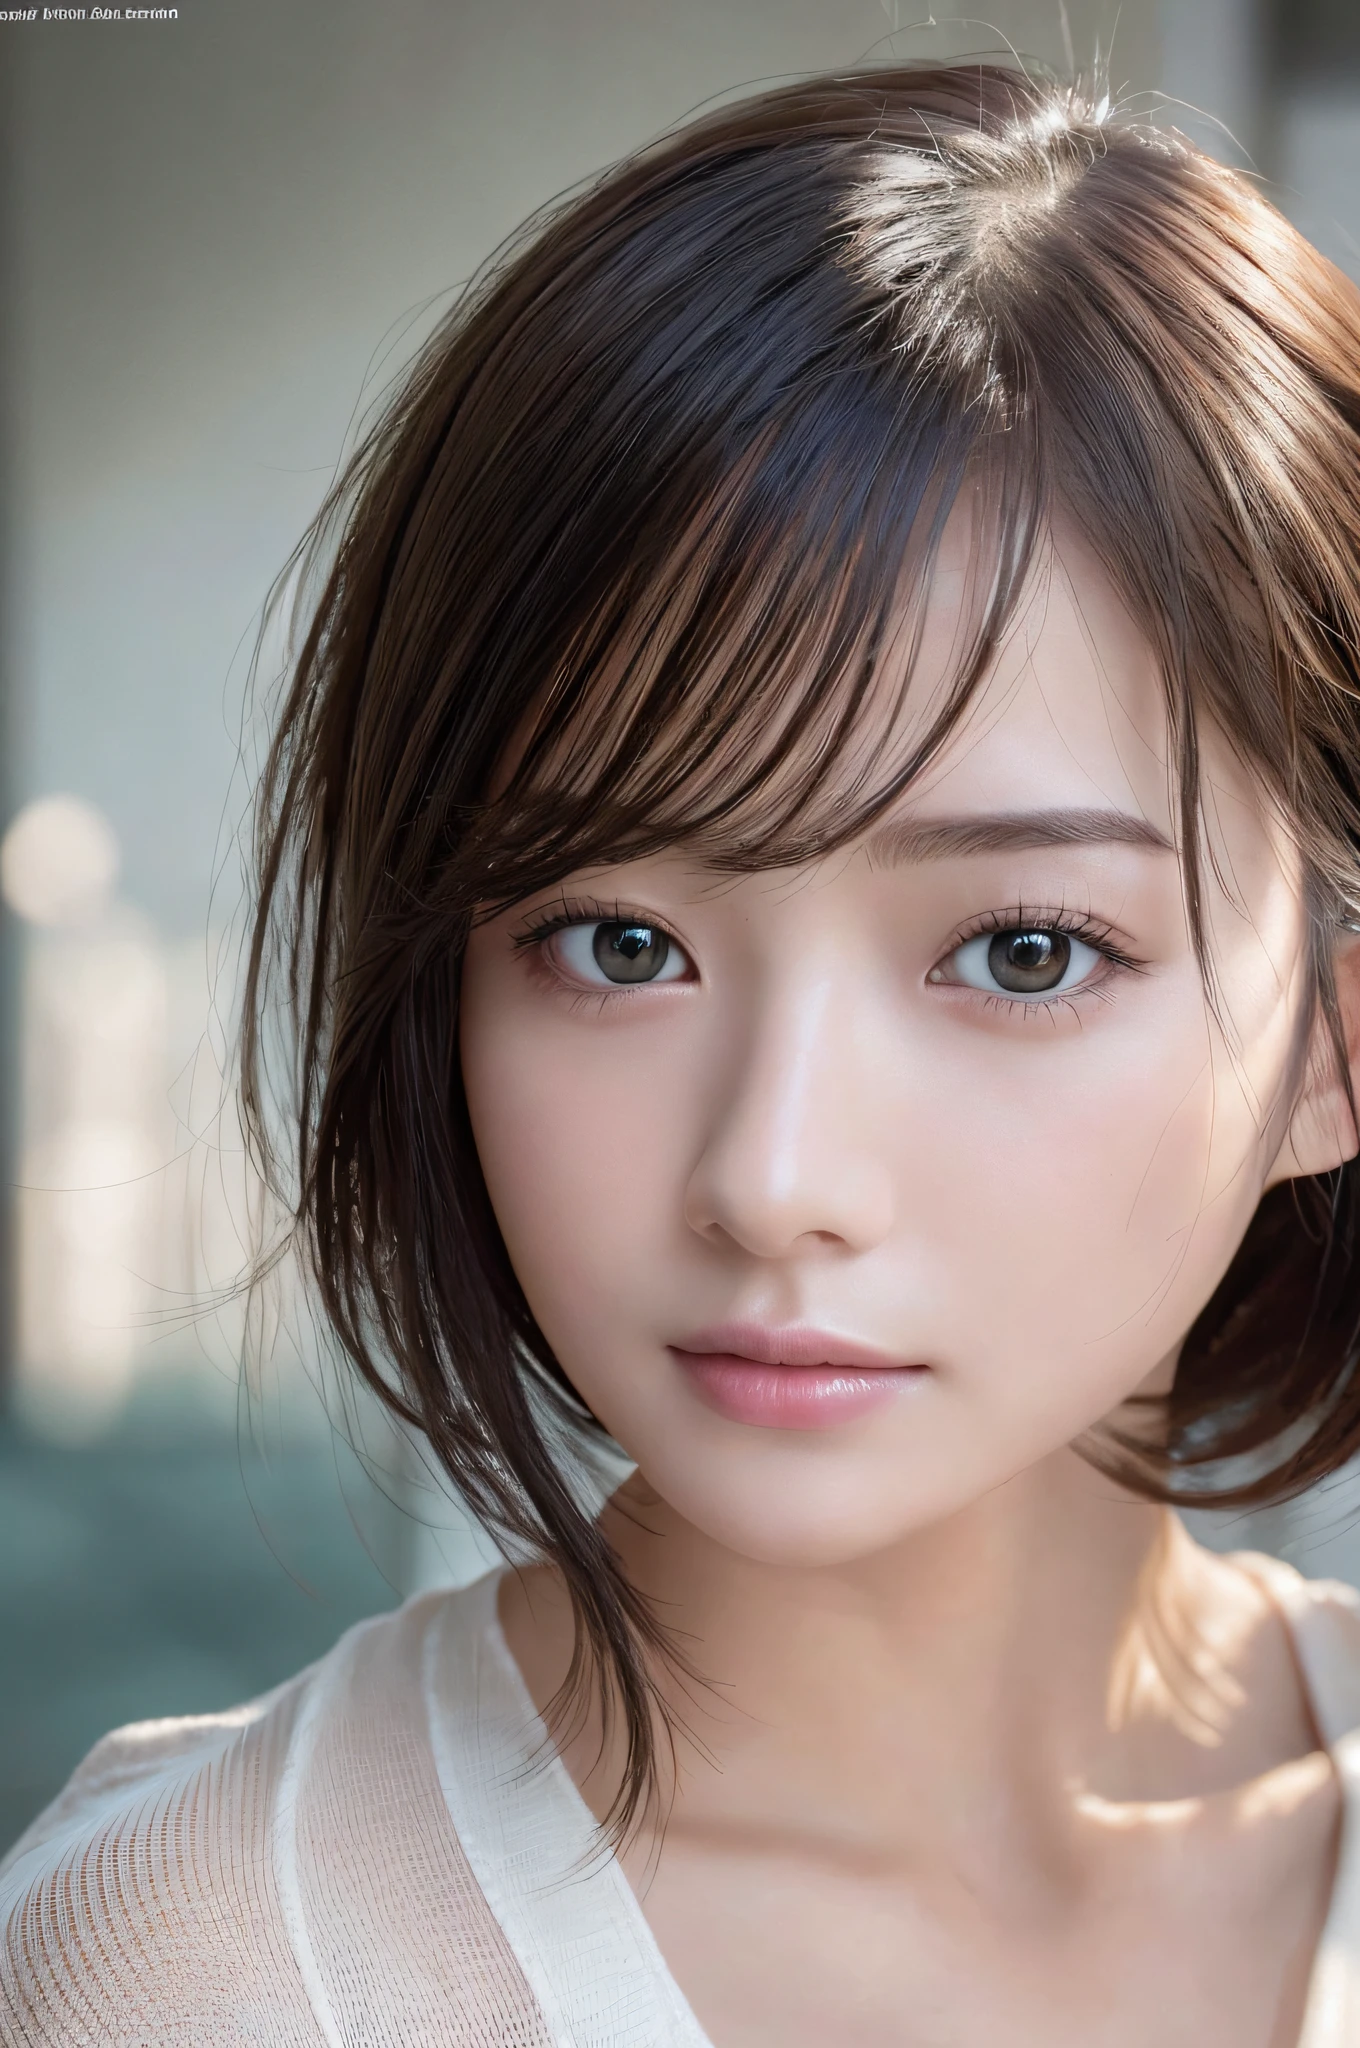 (Masterpiece: 1.3), (8k, photorealistic, RAW photo, best quality: 1.4), (1girl), Japan person, 22 years old, beautiful face, (realistic face), (black hair, short hair: 1.3), beautiful hairstyle, realistic eyes, beautiful detail eyes, (realistic skin), beautiful skin, absurdity, attractive, ultra high resolution, ultra realistic, high definition, golden ratio